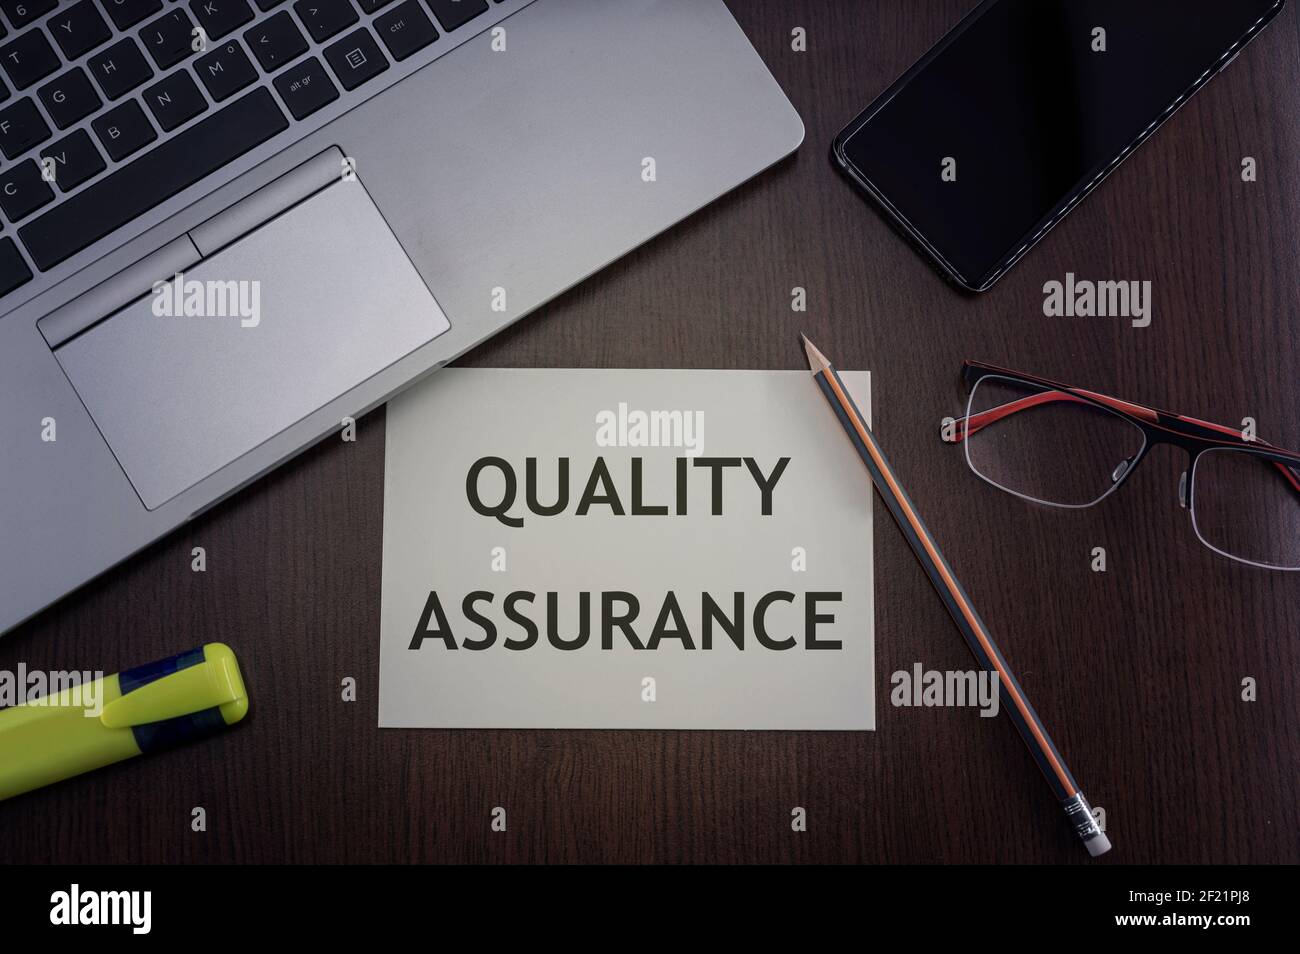 Quality assurance concept. Top view of laptop, phone, glasses and pencil with card with inscription quality assurance. Stock Photo